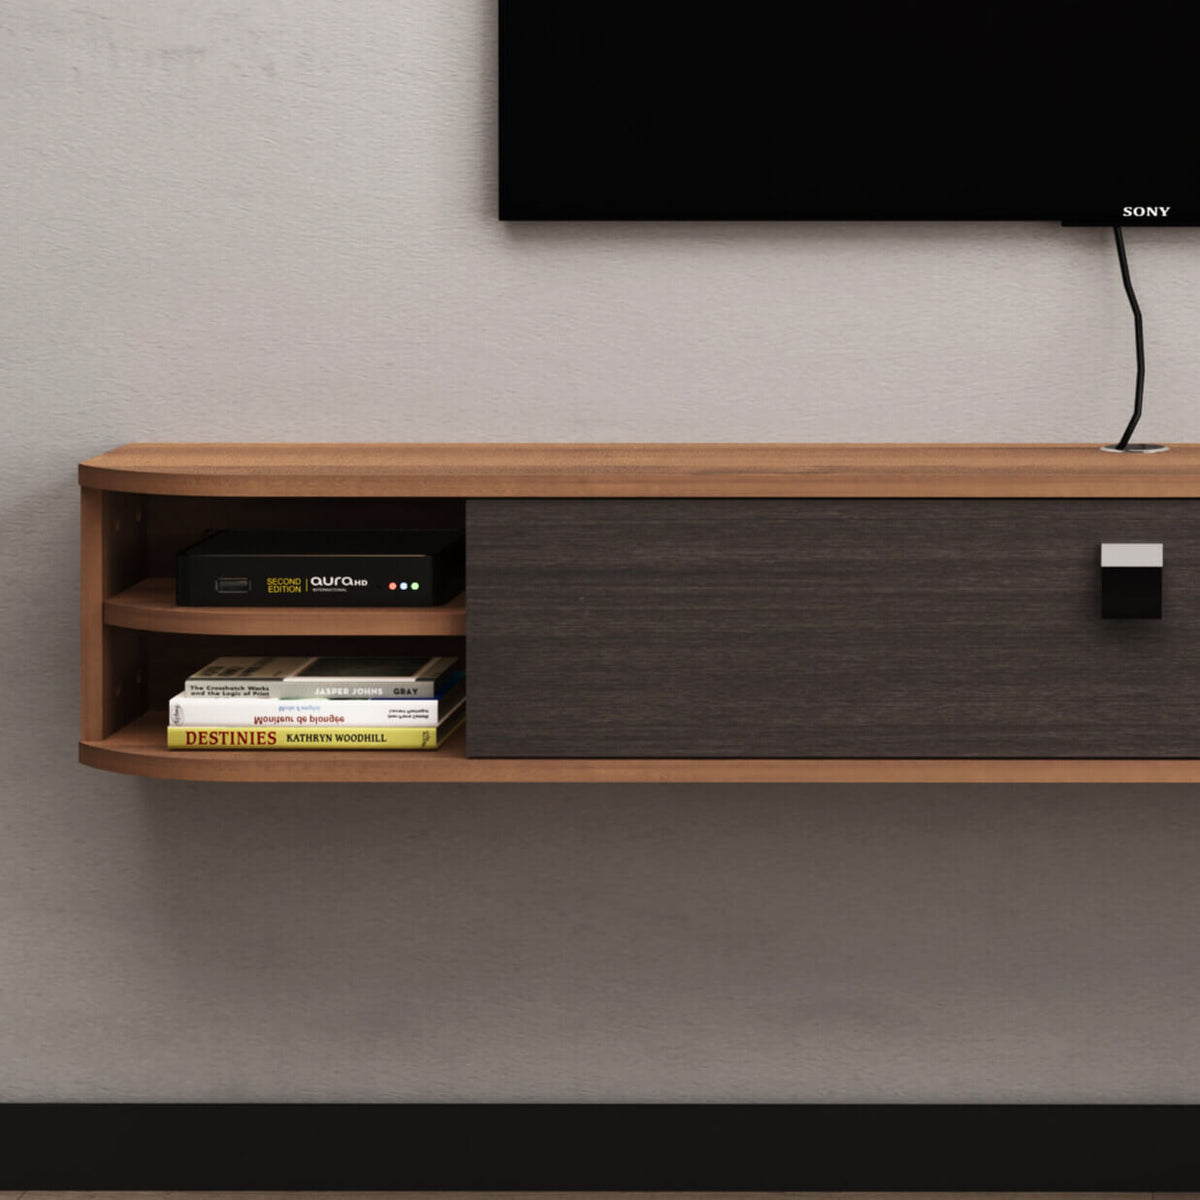 70.86" Modern Wood Floating TV Stand Shelf with Storage Cubbies for 80" TVs, Walnut